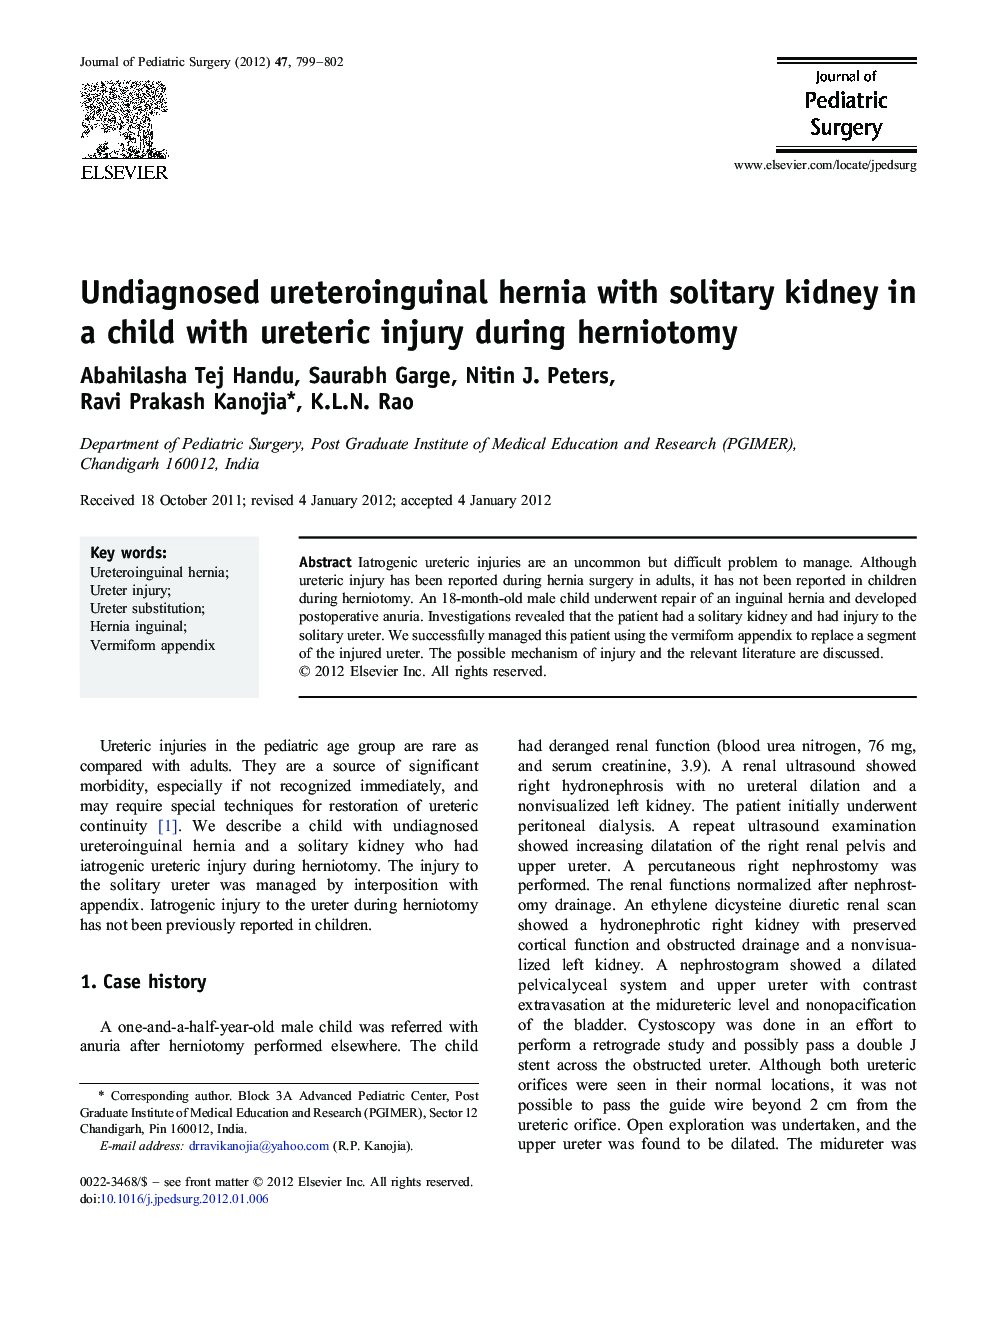 Undiagnosed ureteroinguinal hernia with solitary kidney in a child with ureteric injury during herniotomy